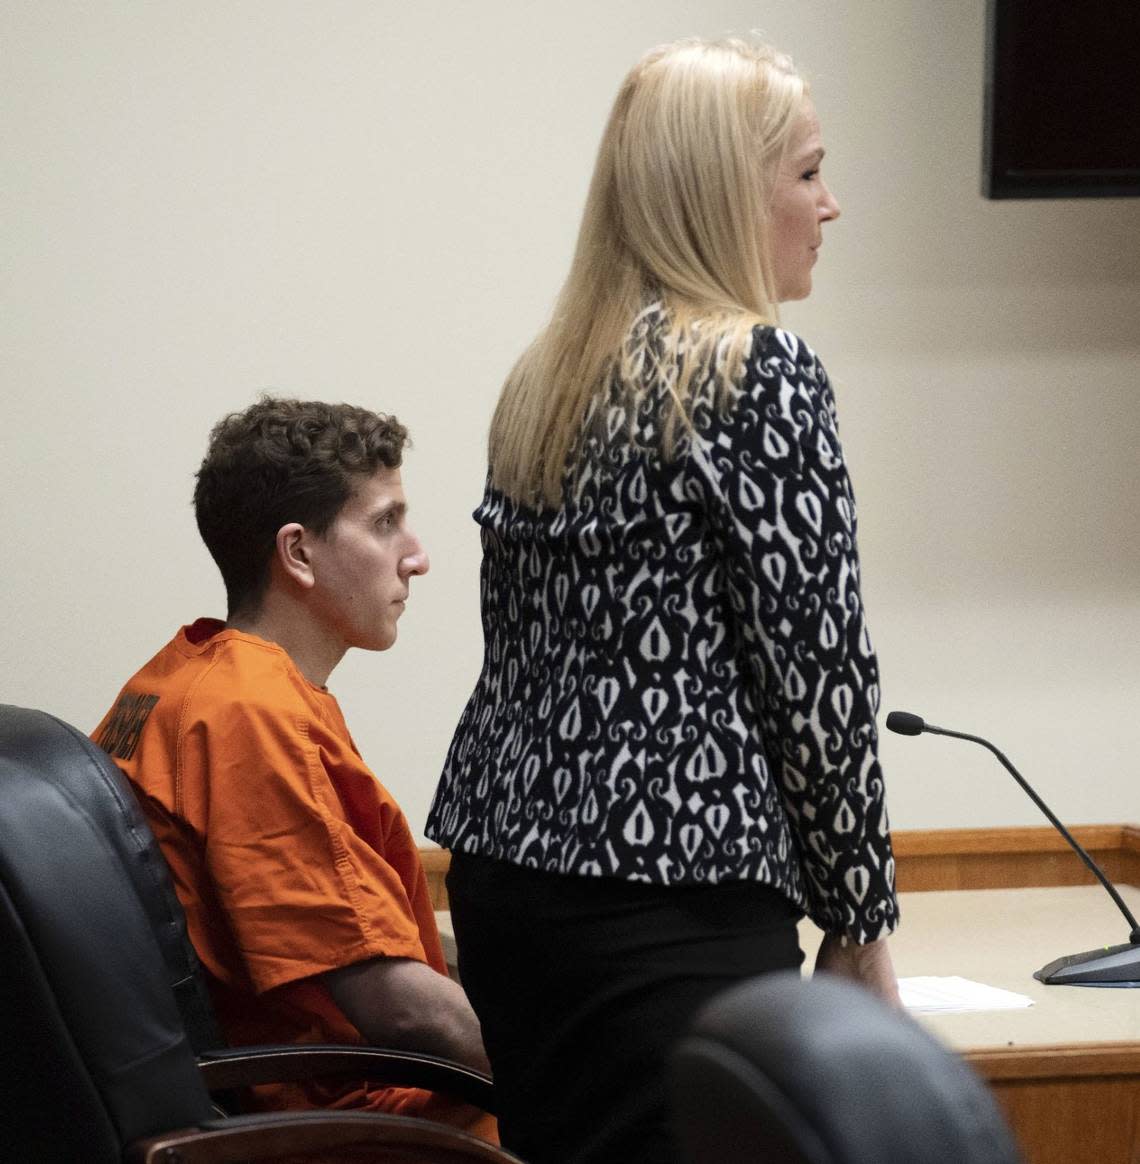 Bryan Kohberger, seated, who is accused of killing four University of Idaho students on Nov. 13, looks on as his attorney, public defender Anne Taylor speaks during a hearing.